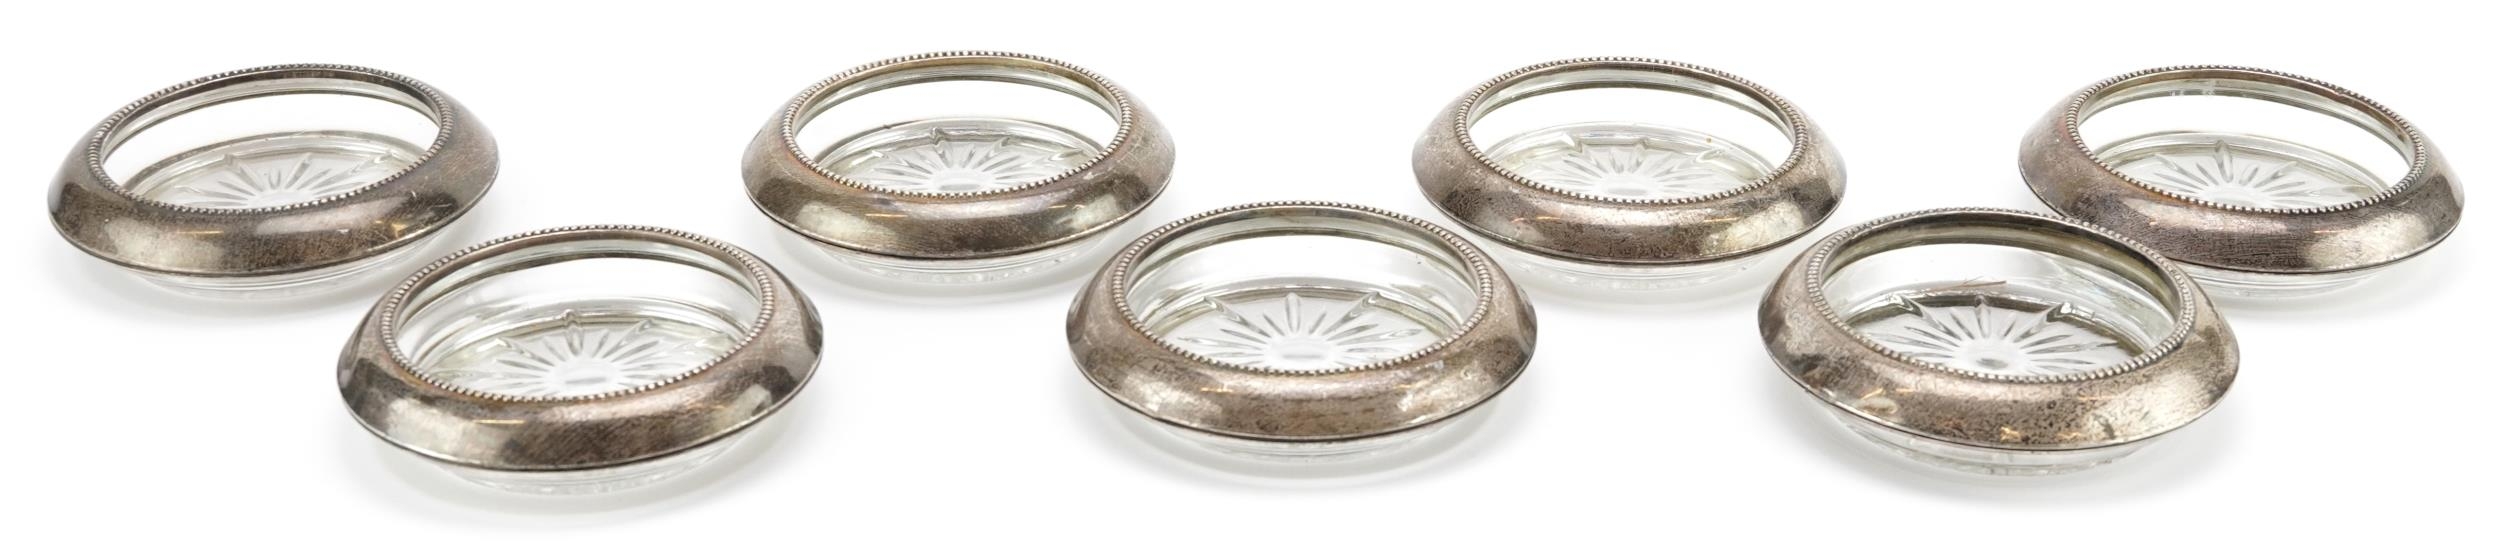 Frank M Whiting, set of seven circular sterling silver mounted dishes, 10cm in diameter